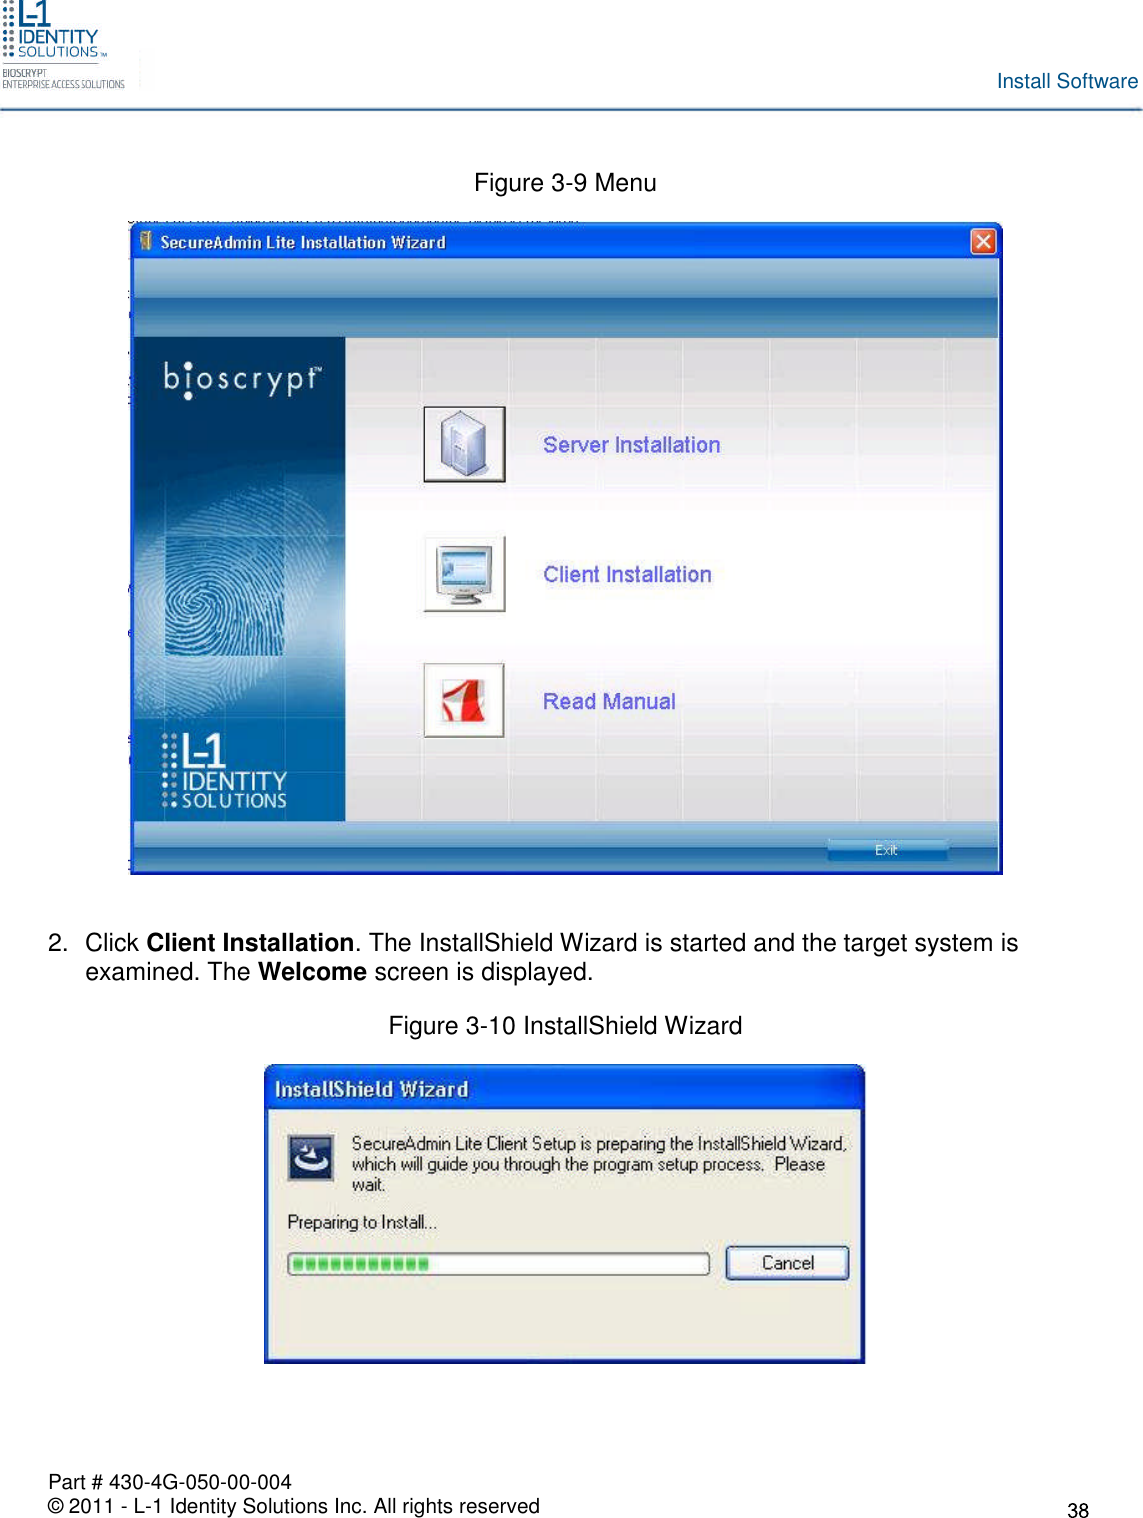 Part # 430-4G-050-00-004© 2011 - L-1 Identity Solutions Inc. All rights reservedInstall SoftwareFigure 3-9 Menu2. Click Client Installation. The InstallShield Wizard is started and the target system isexamined. The Welcome screen is displayed.Figure 3-10 InstallShield Wizard